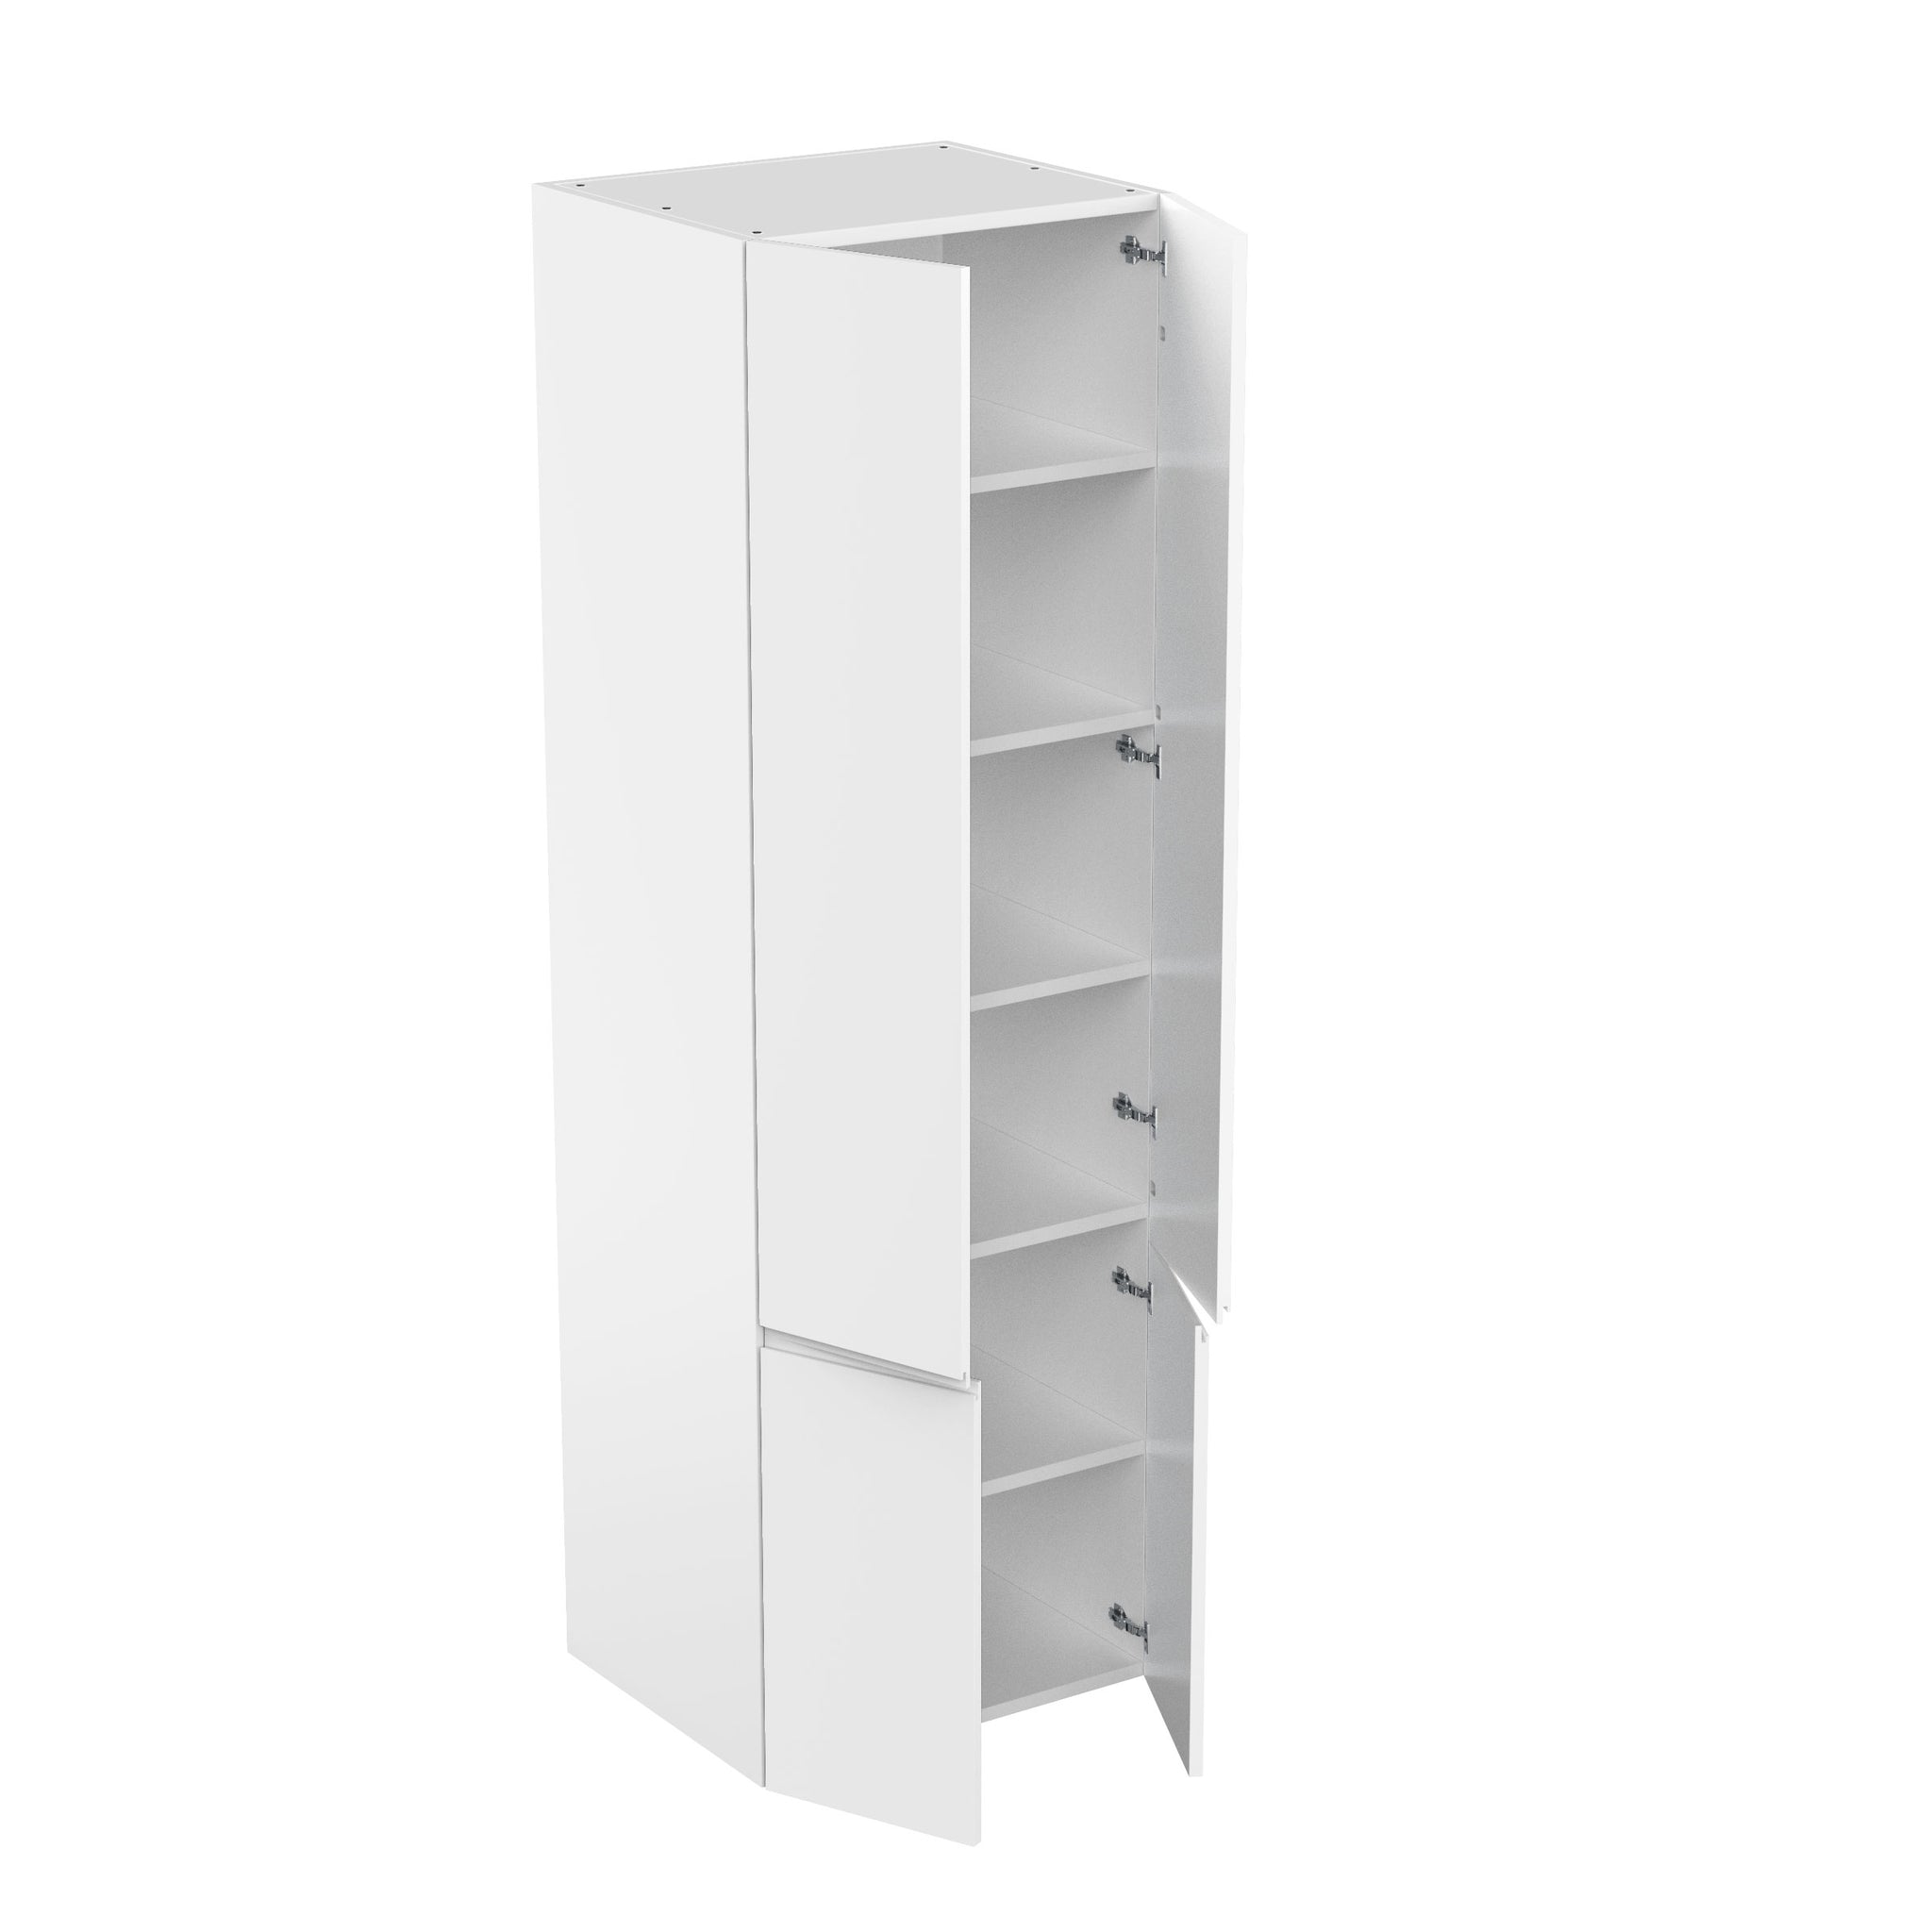 Tall Kitchen Cabinet - RTA - Lacquer White - Double Door | 30"W x 96"H x 23.8"D